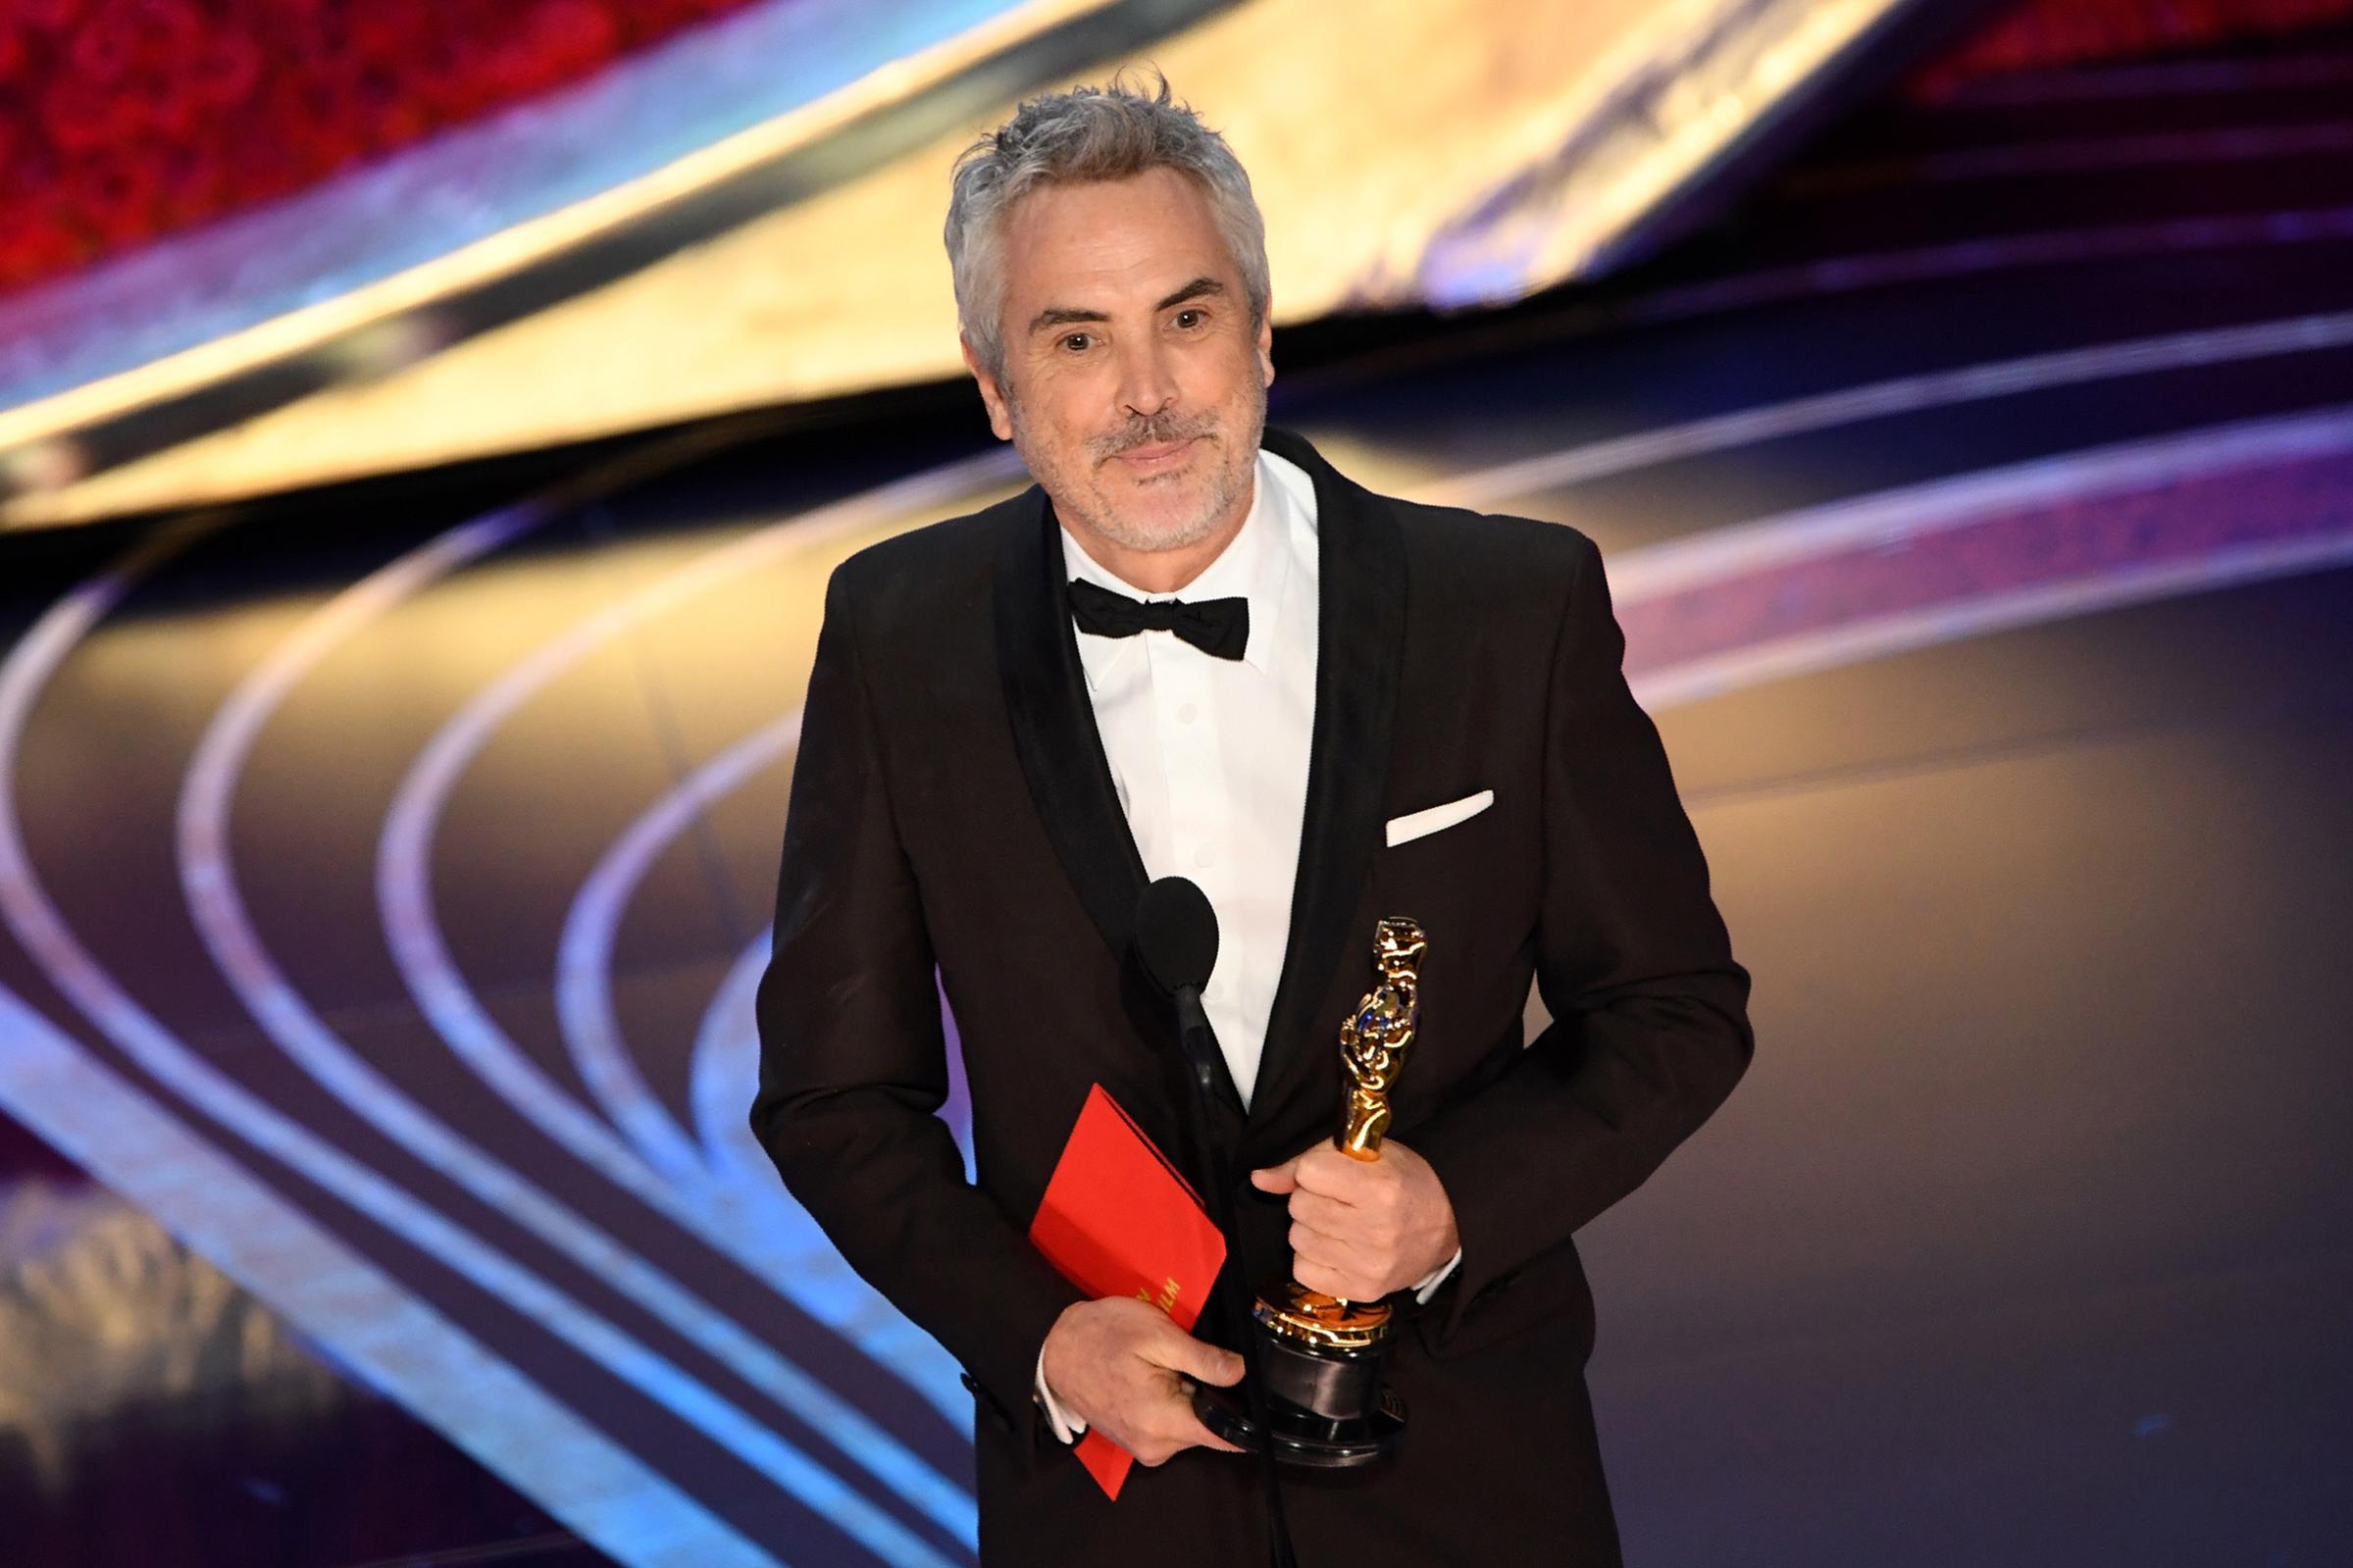 Best Foreign Language Film nominee for "Roma" Mexican director Alfonso Cuaron accepts the award for Best Foreign Language Film during the 91st Annual Academy Awards at the Dolby Theatre in Hollywood on Feb. 24, 2019.